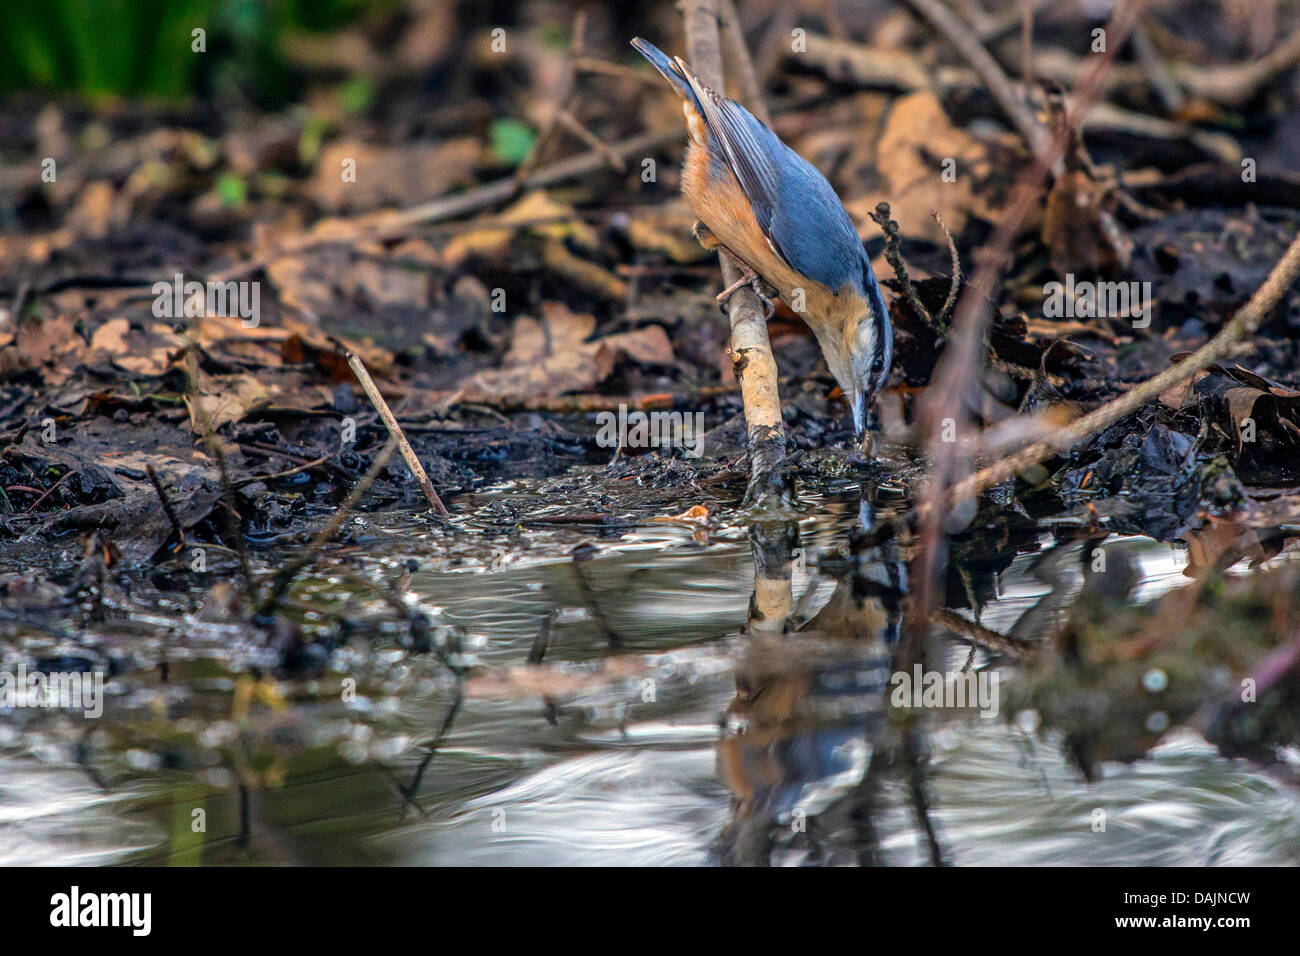 Eurasian nuthatch (Sitta europaea), searching nesting material at a pondside, Germany, Bavaria Stock Photo